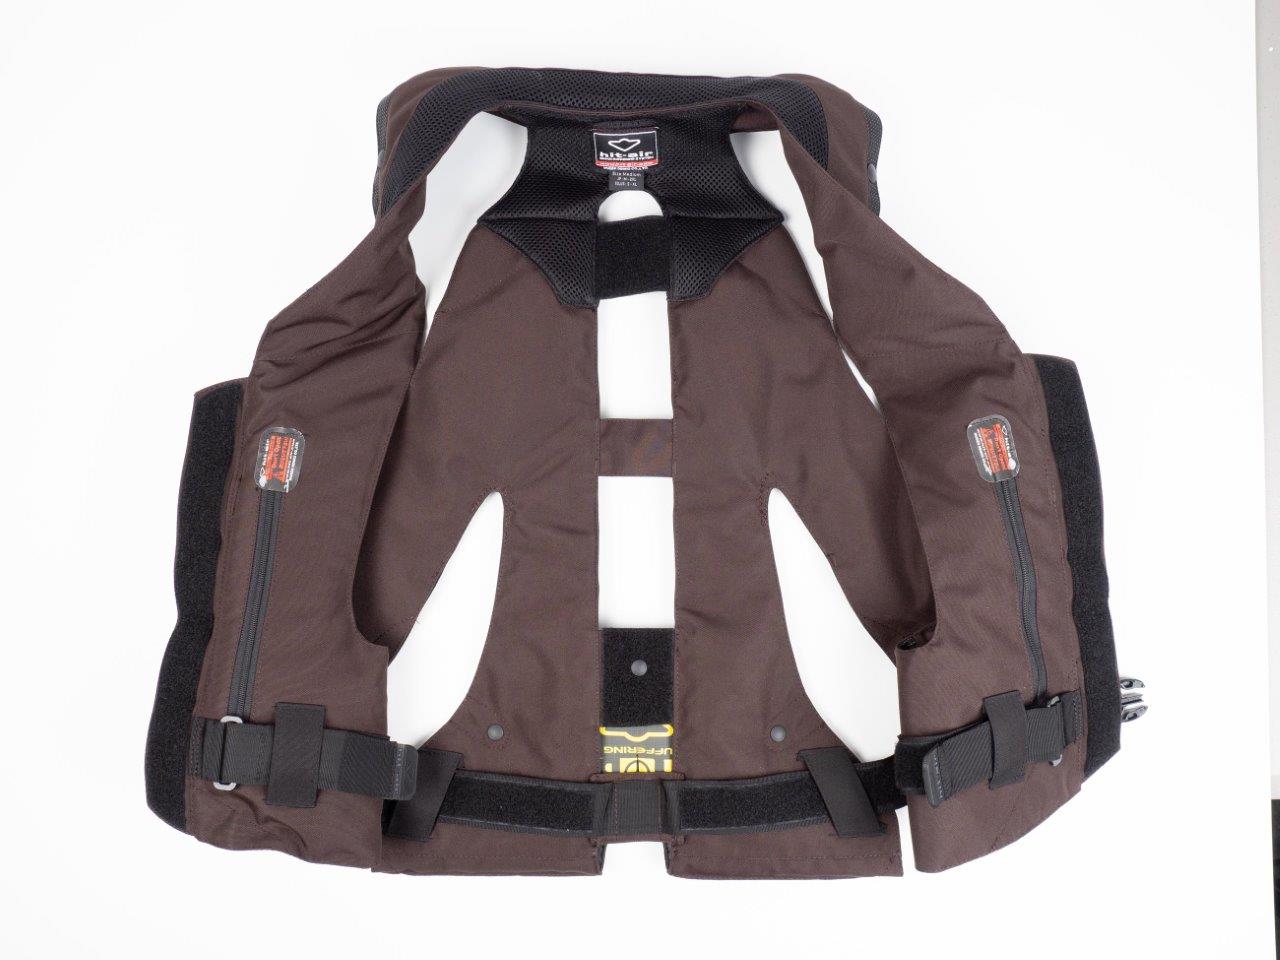 Hit-Air Airbagvest LV (size S-XL)